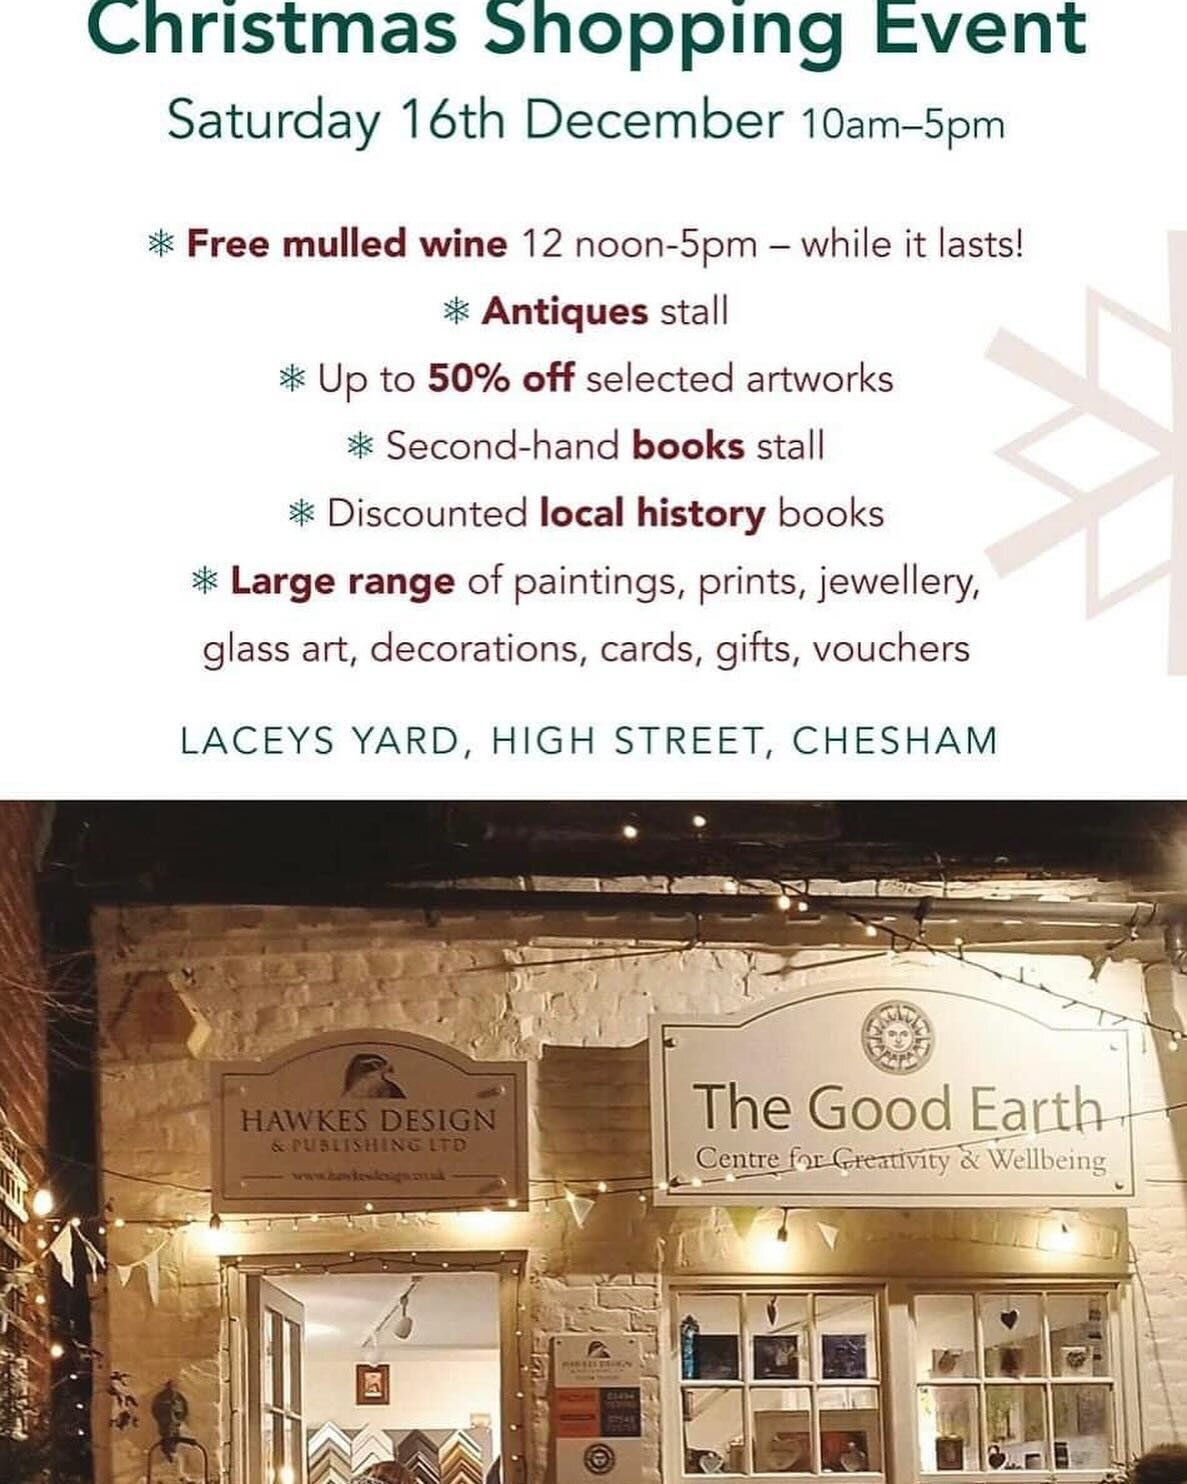 Do come and join us for a free glass of mulled wine.